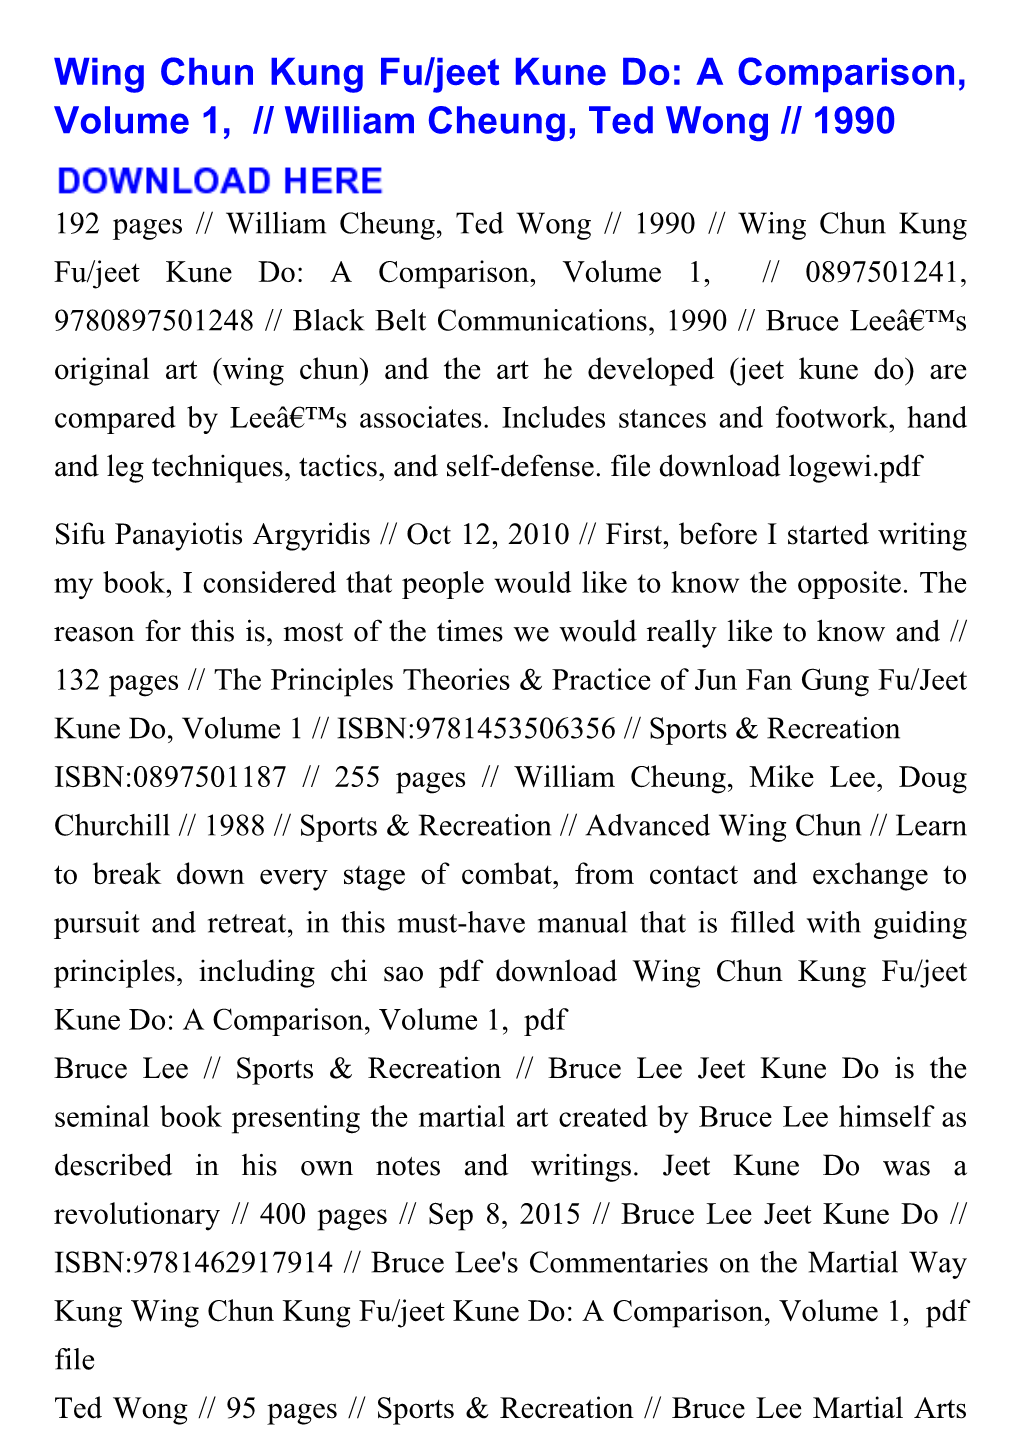 Wing Chun Kung Fu/Jeet Kune Do: a Comparison, Volume 1, // William Cheung, Ted Wong // 1990